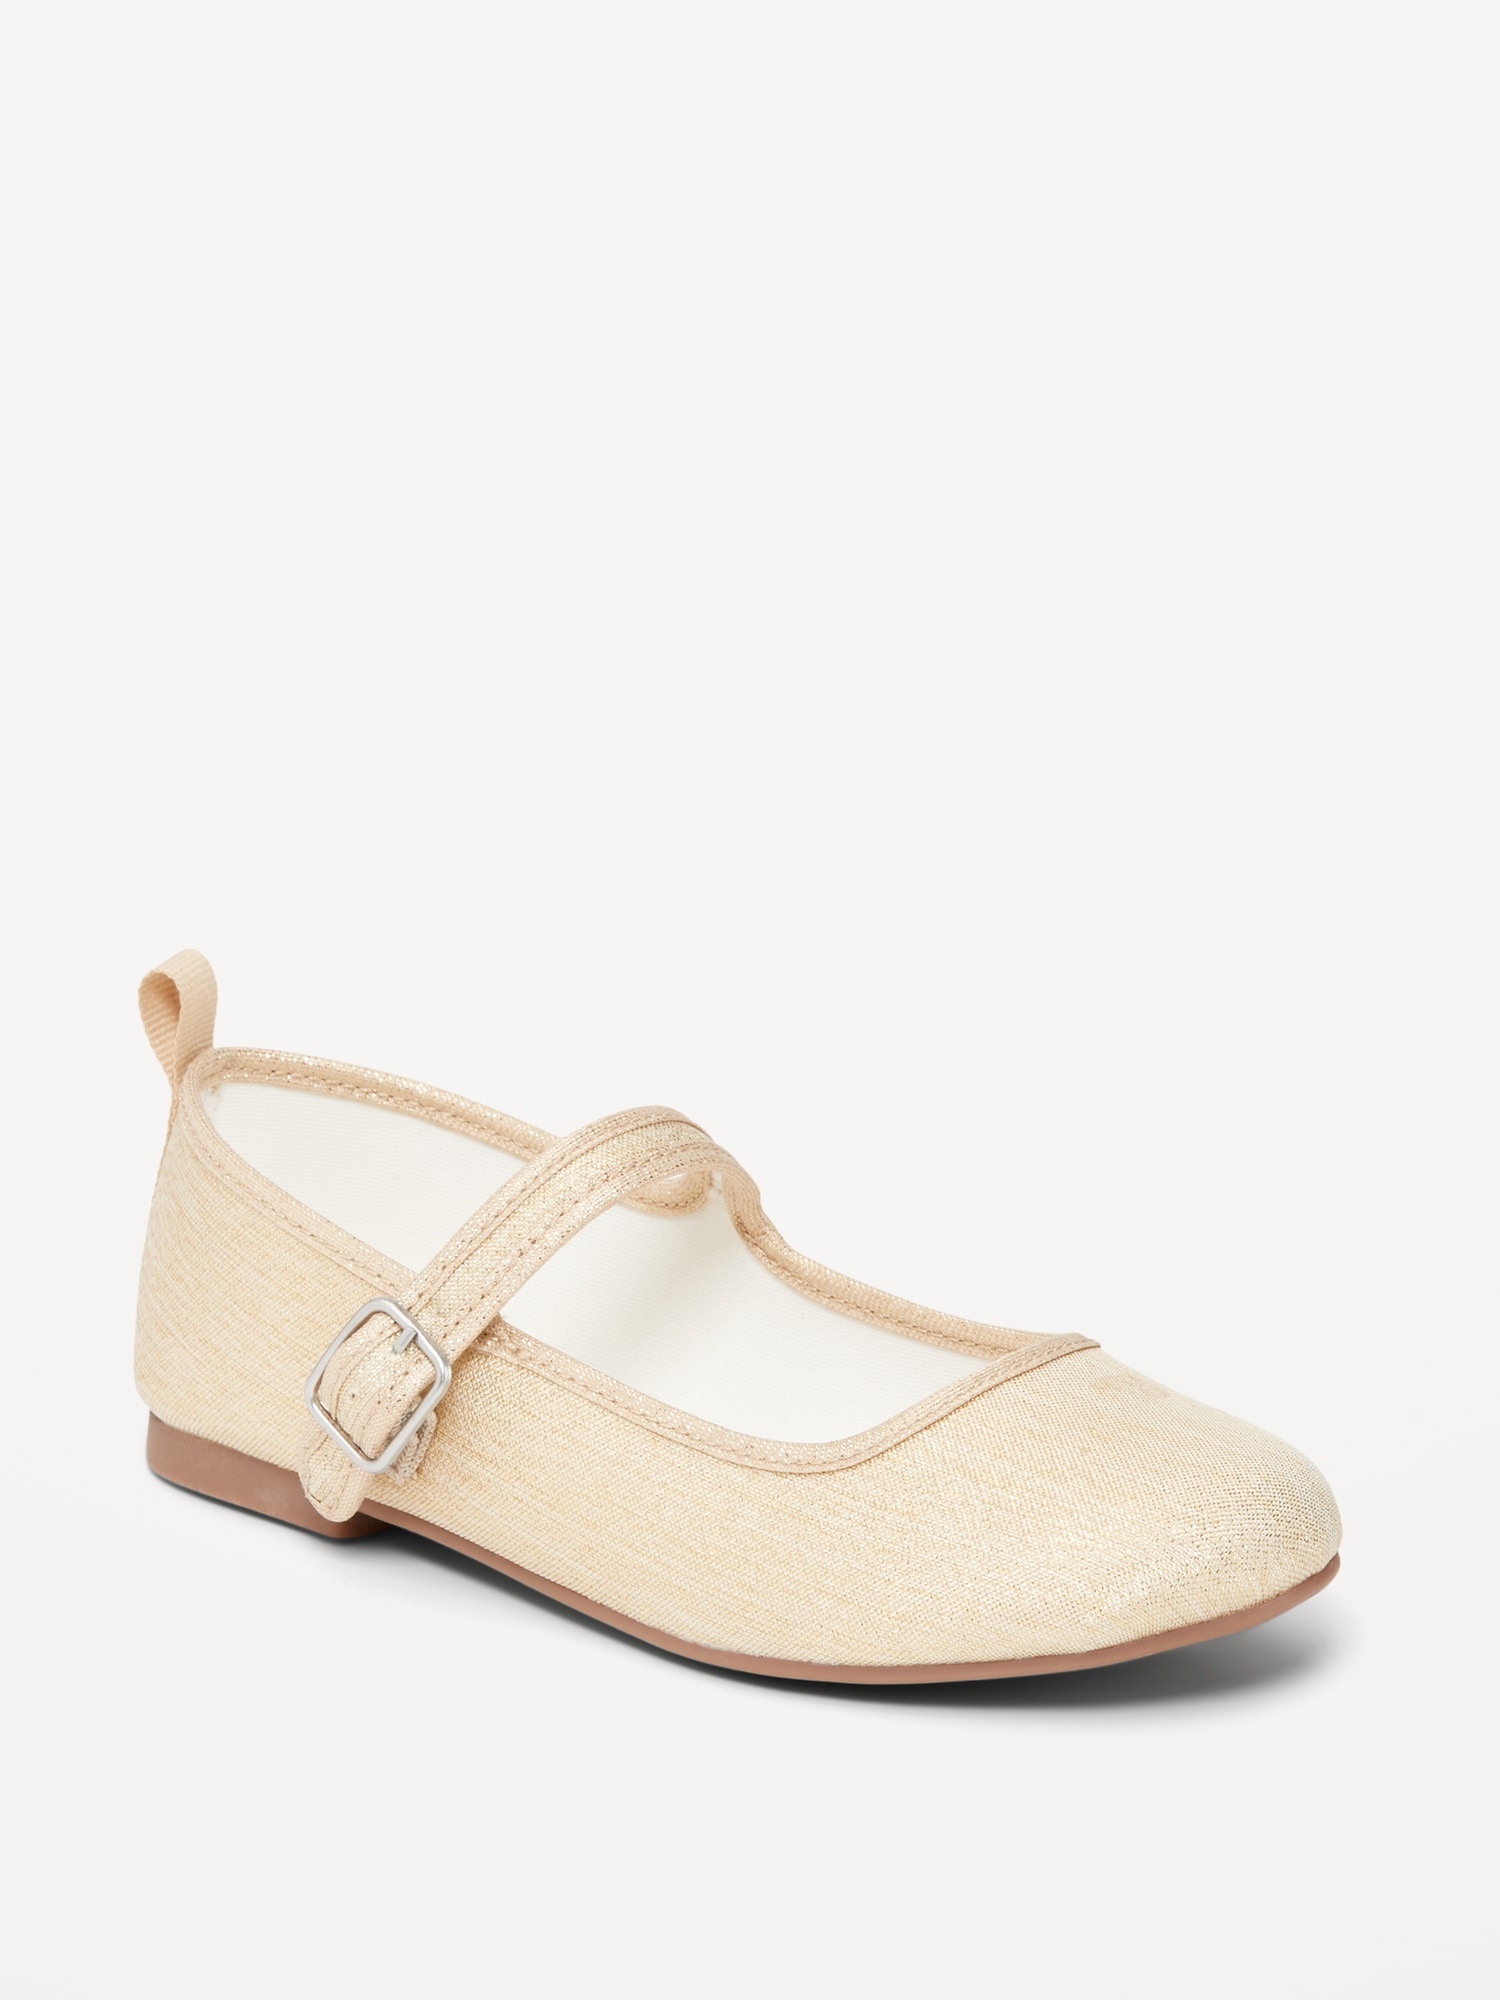 Canvas Ballet Flat Shoes for Girls | Old Navy